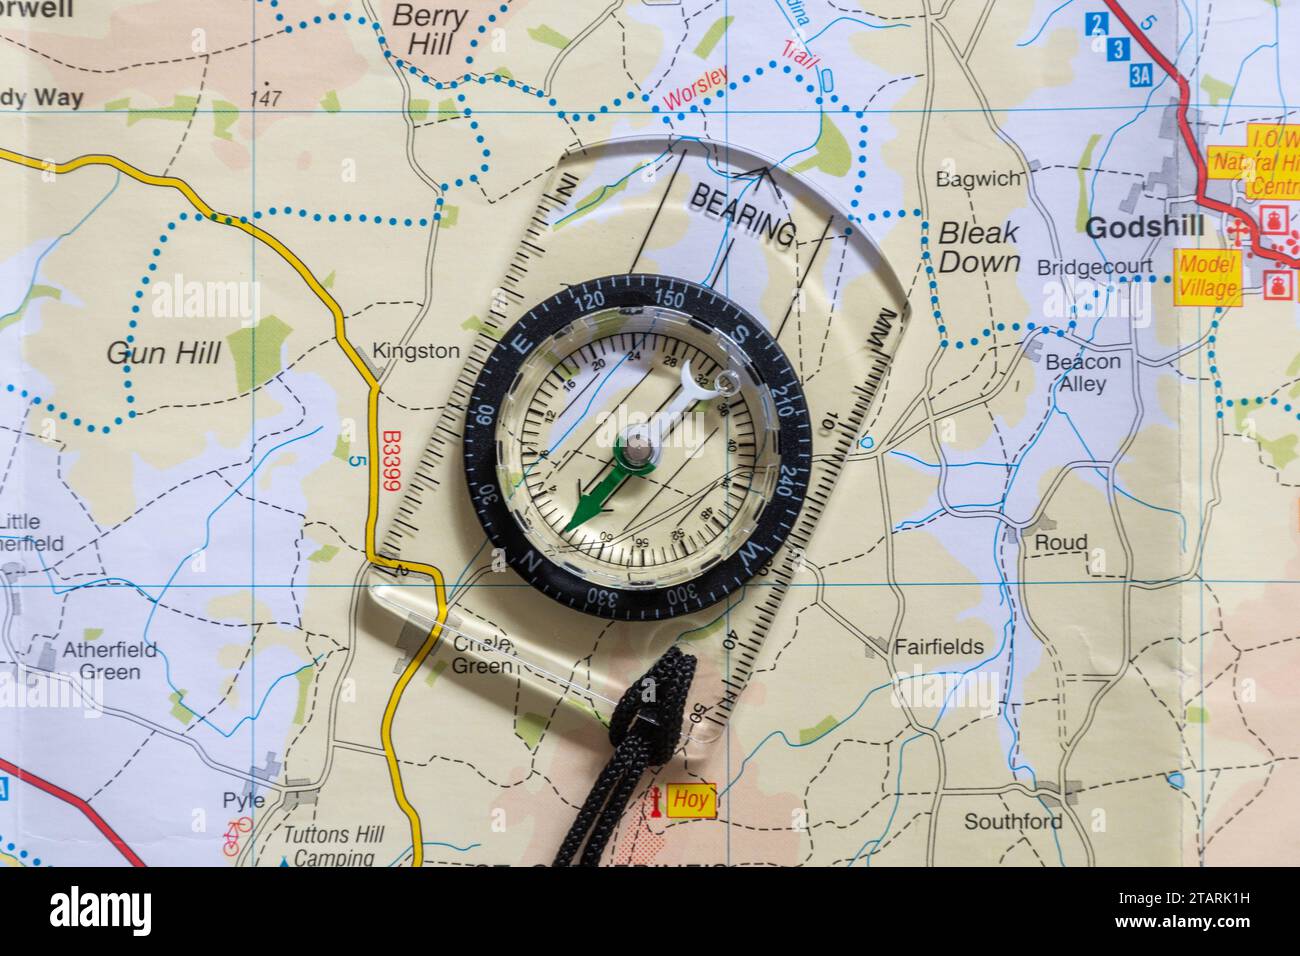 A map and compass, England, UK. Concept: navigation, finding your way, direction, bearing Stock Photo